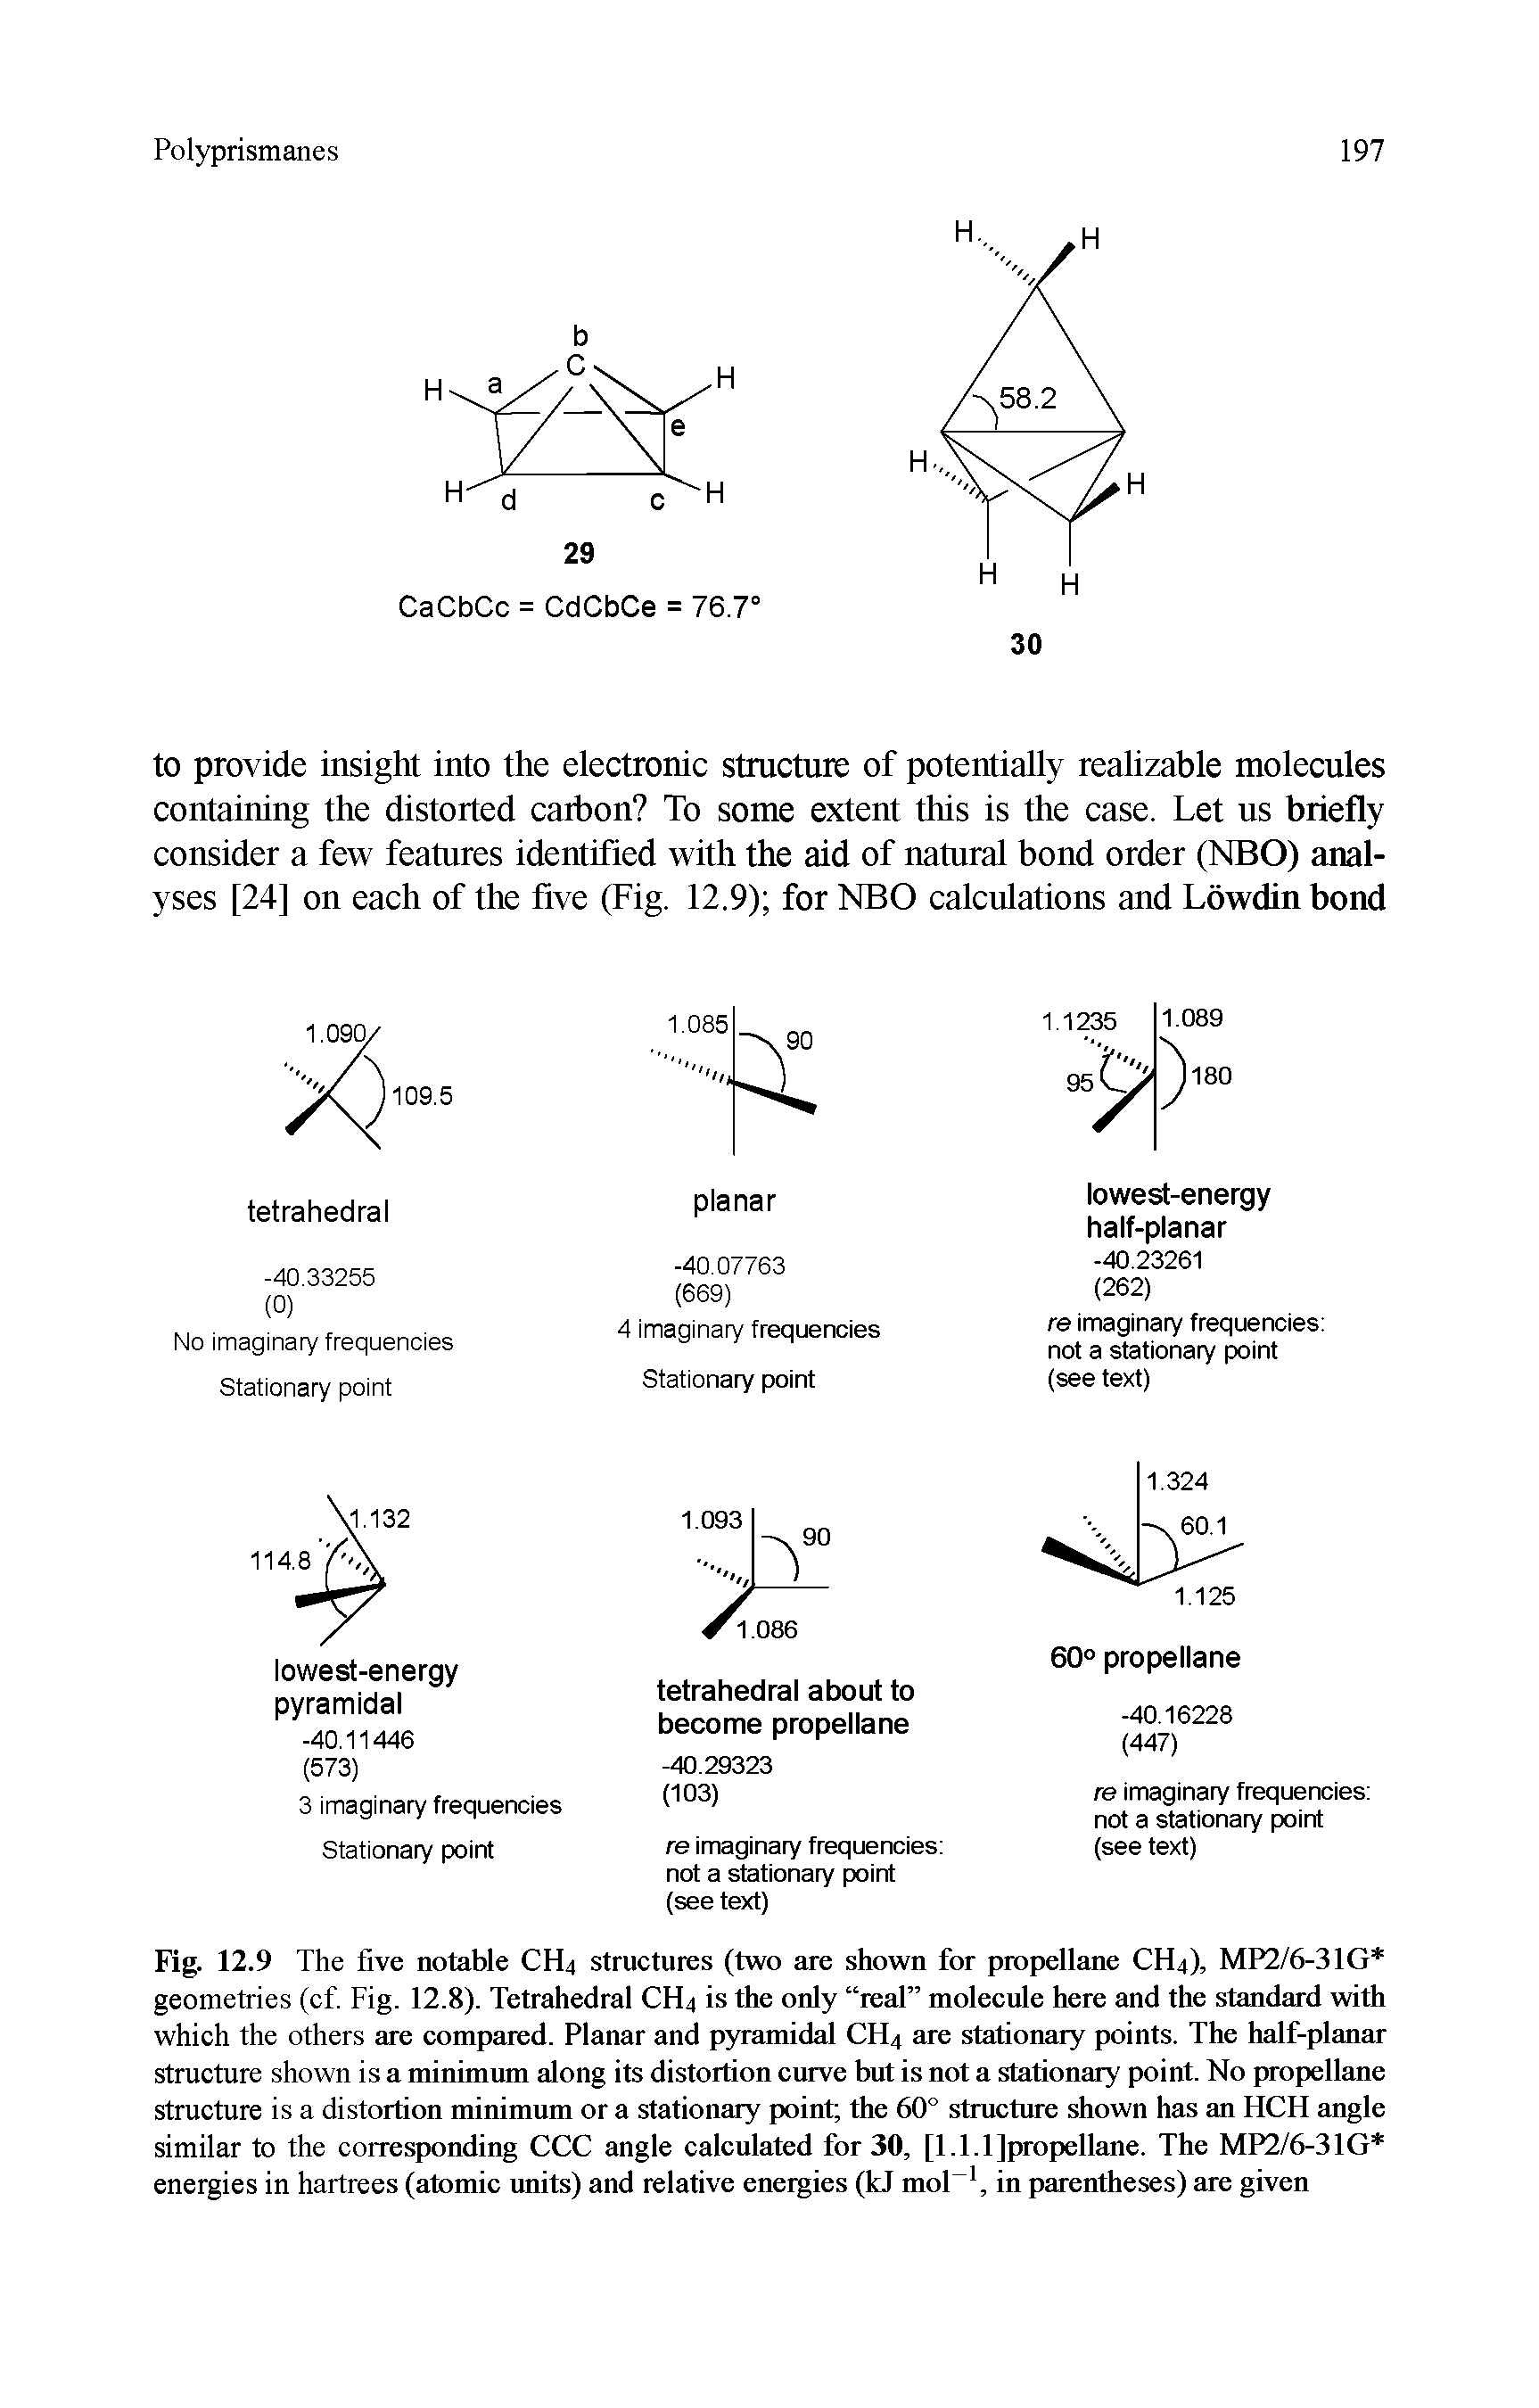 Fig. 12.9 The five notable CH4 structures (two are shown for propellane CH4), MP2/6-31G geometries (ef. Fig. 12.8). Tetrahedral CH4 is the only real molecule here and the standard with which the others are compared. Planar and pyramidal CH4 are stationary points. The half-planar structure shown is a minimum along its distortion curve but is not a stationary point. No propellane structure is a distortion minimum or a stationary point the 60° structure shown has an HCH angle similar to the corresponding CCC angle calculated for 30, [1.1.1 (propellane. The MP2/6-31G energies in hartrees (atomic units) and relative energies (kJ mol , in parentheses) are given...